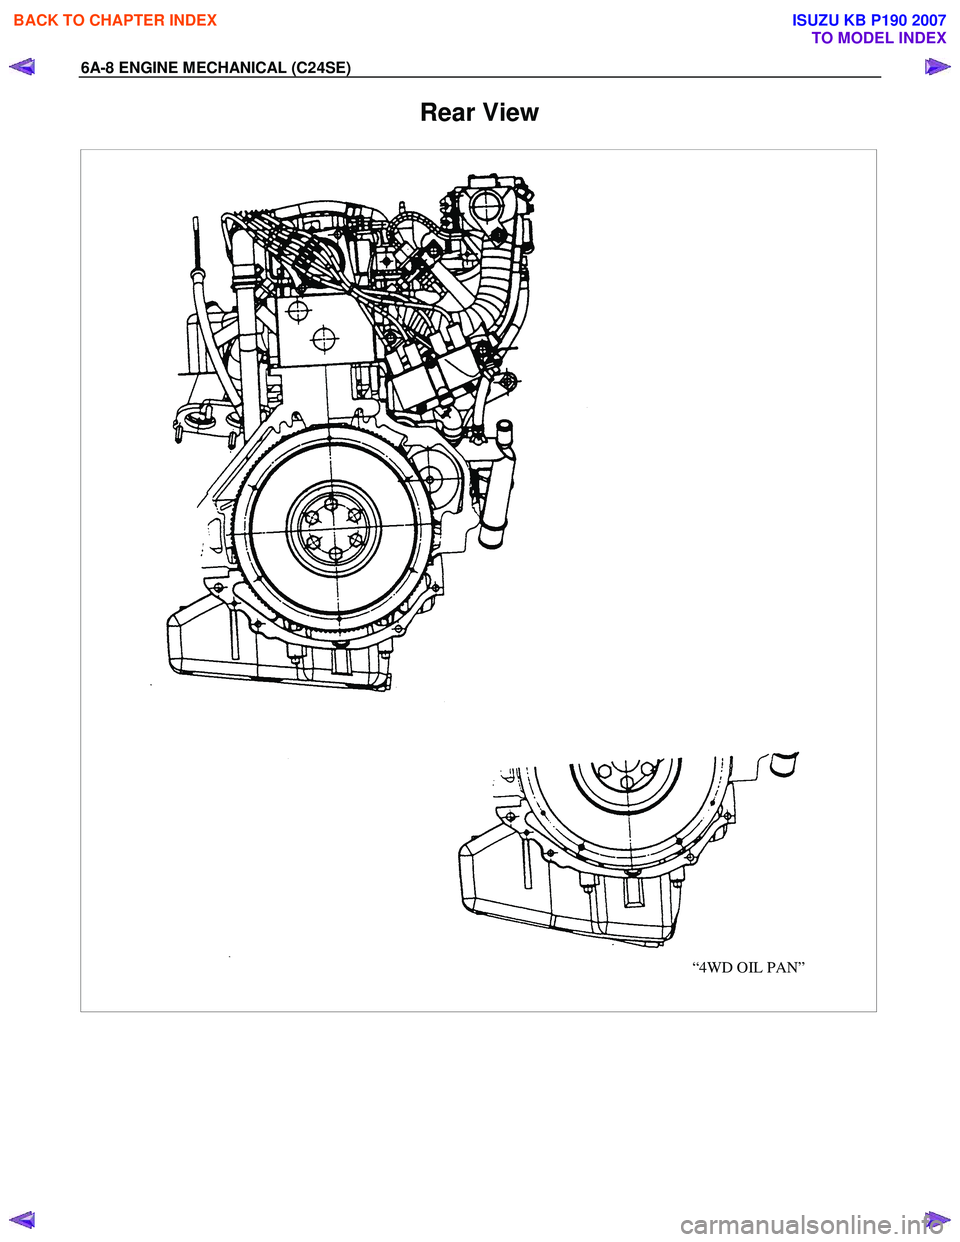 ISUZU KB P190 2007  Workshop Repair Manual 6A-8 ENGINE MECHANICAL (C24SE) 
Rear View 
“4WD OIL PAN”
 
 
BACK TO CHAPTER INDEX
TO MODEL INDEX
ISUZU KB P190 2007 